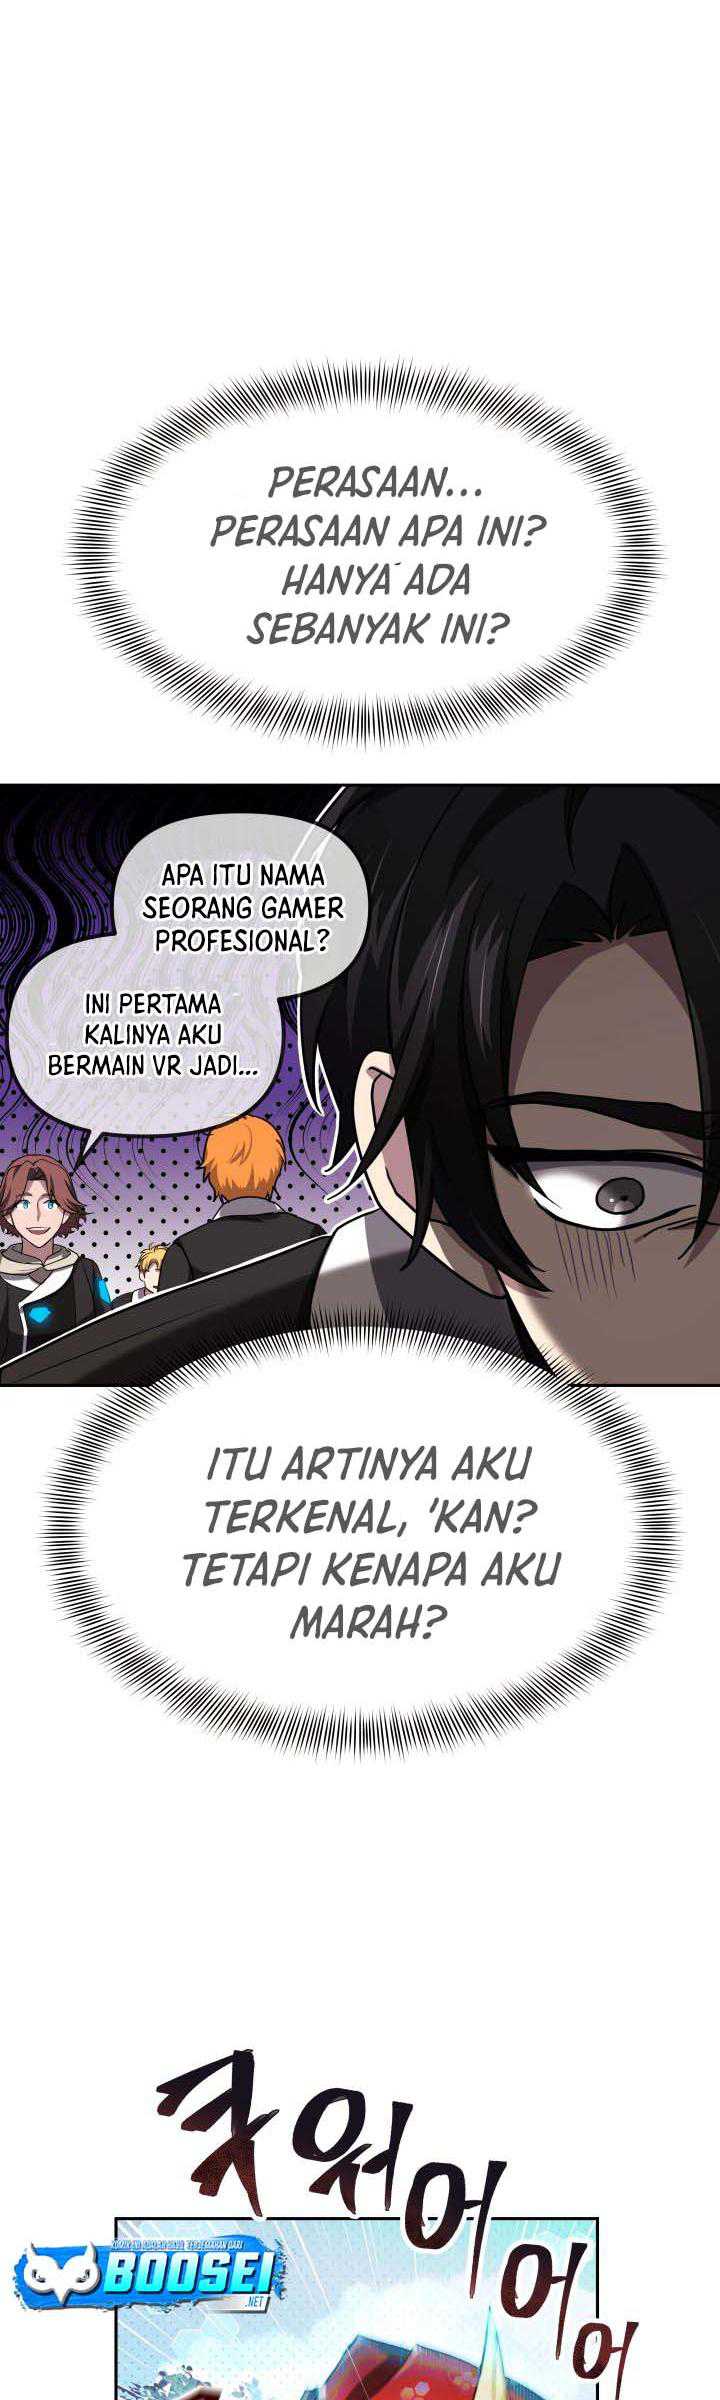 Ark the Legend Chapter 03